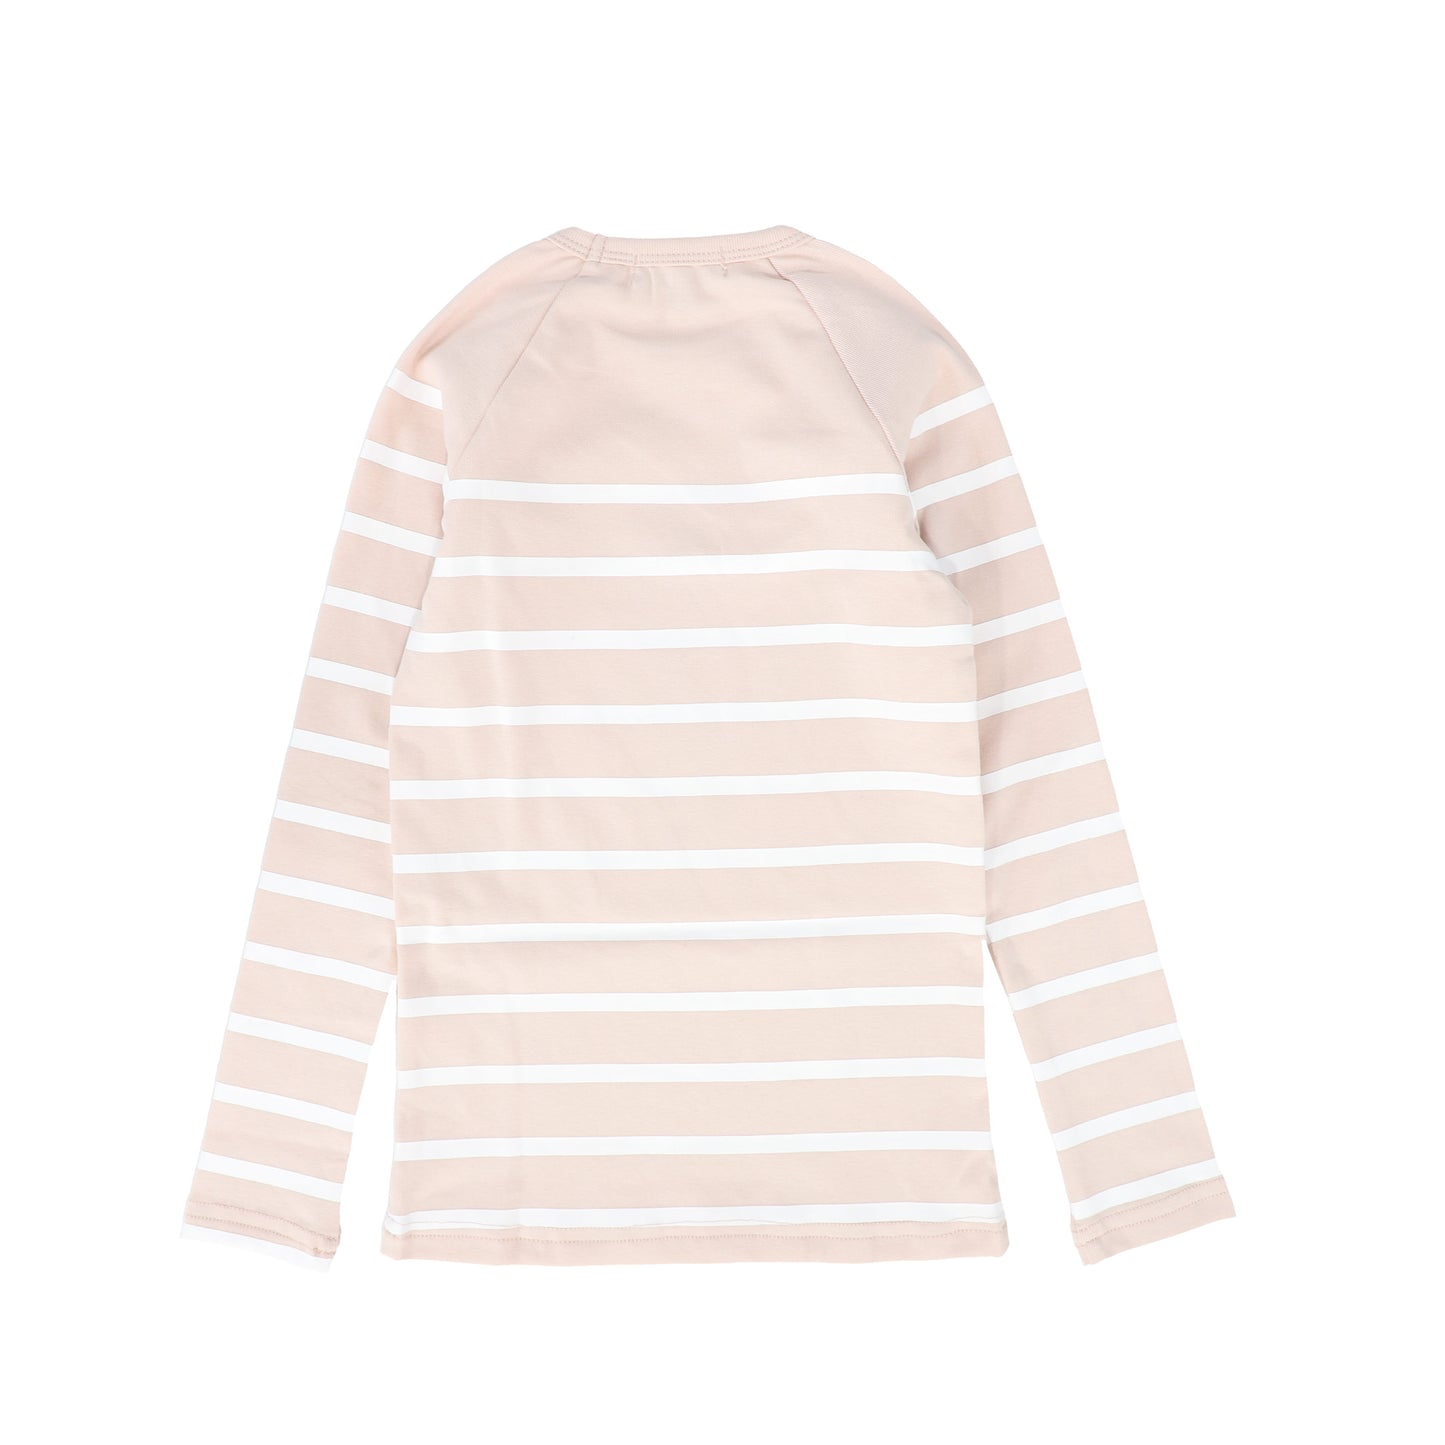 BAMBOO PINK STRIPED LS TEE